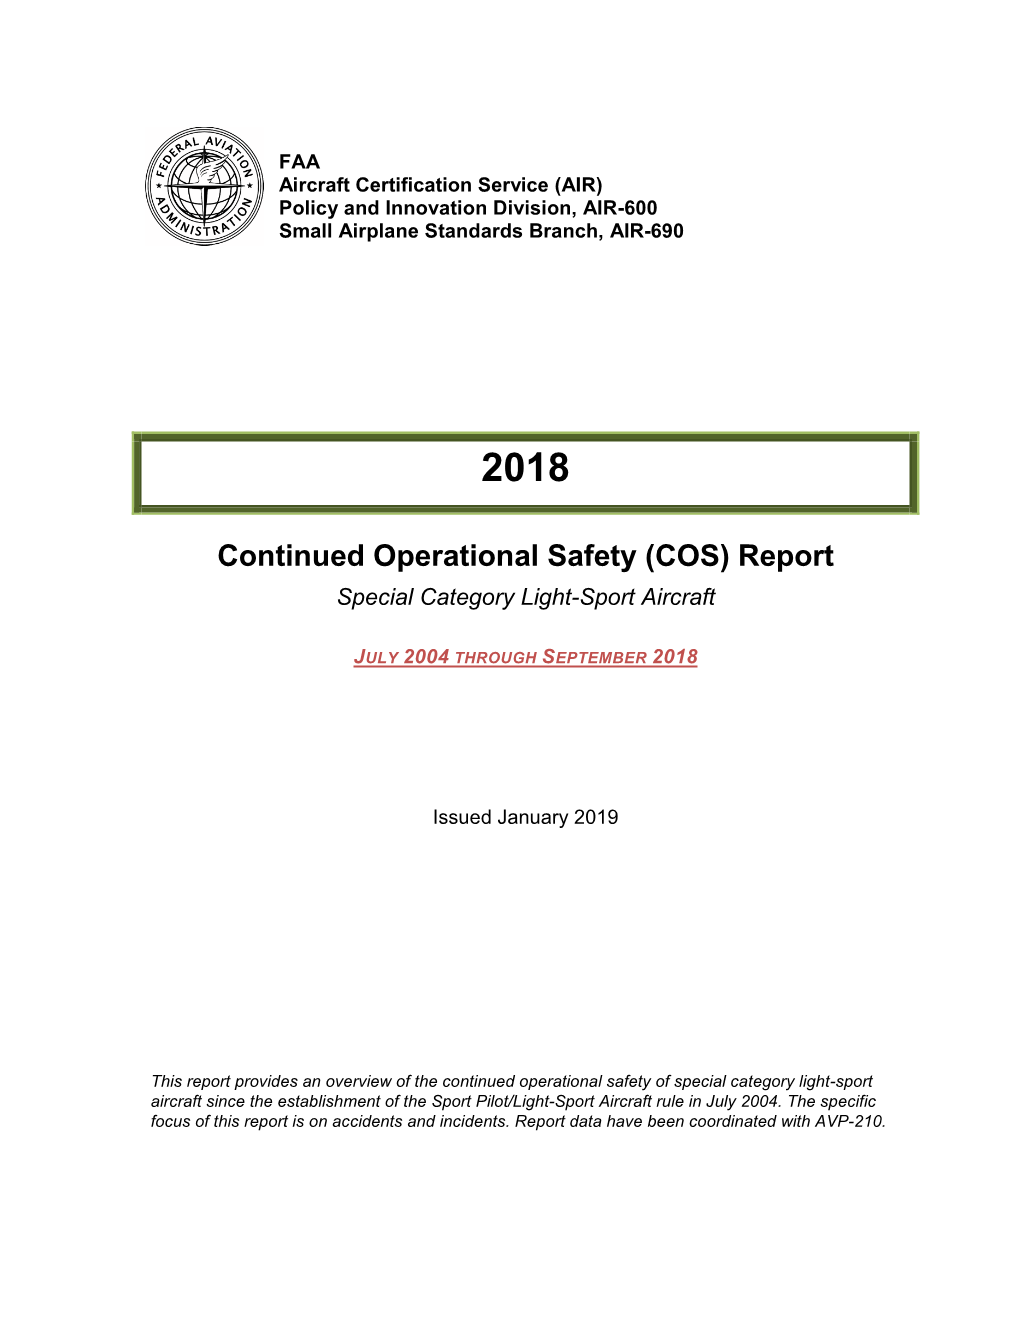 Continued Operational Safety (COS) Report Special Category Light-Sport Aircraft